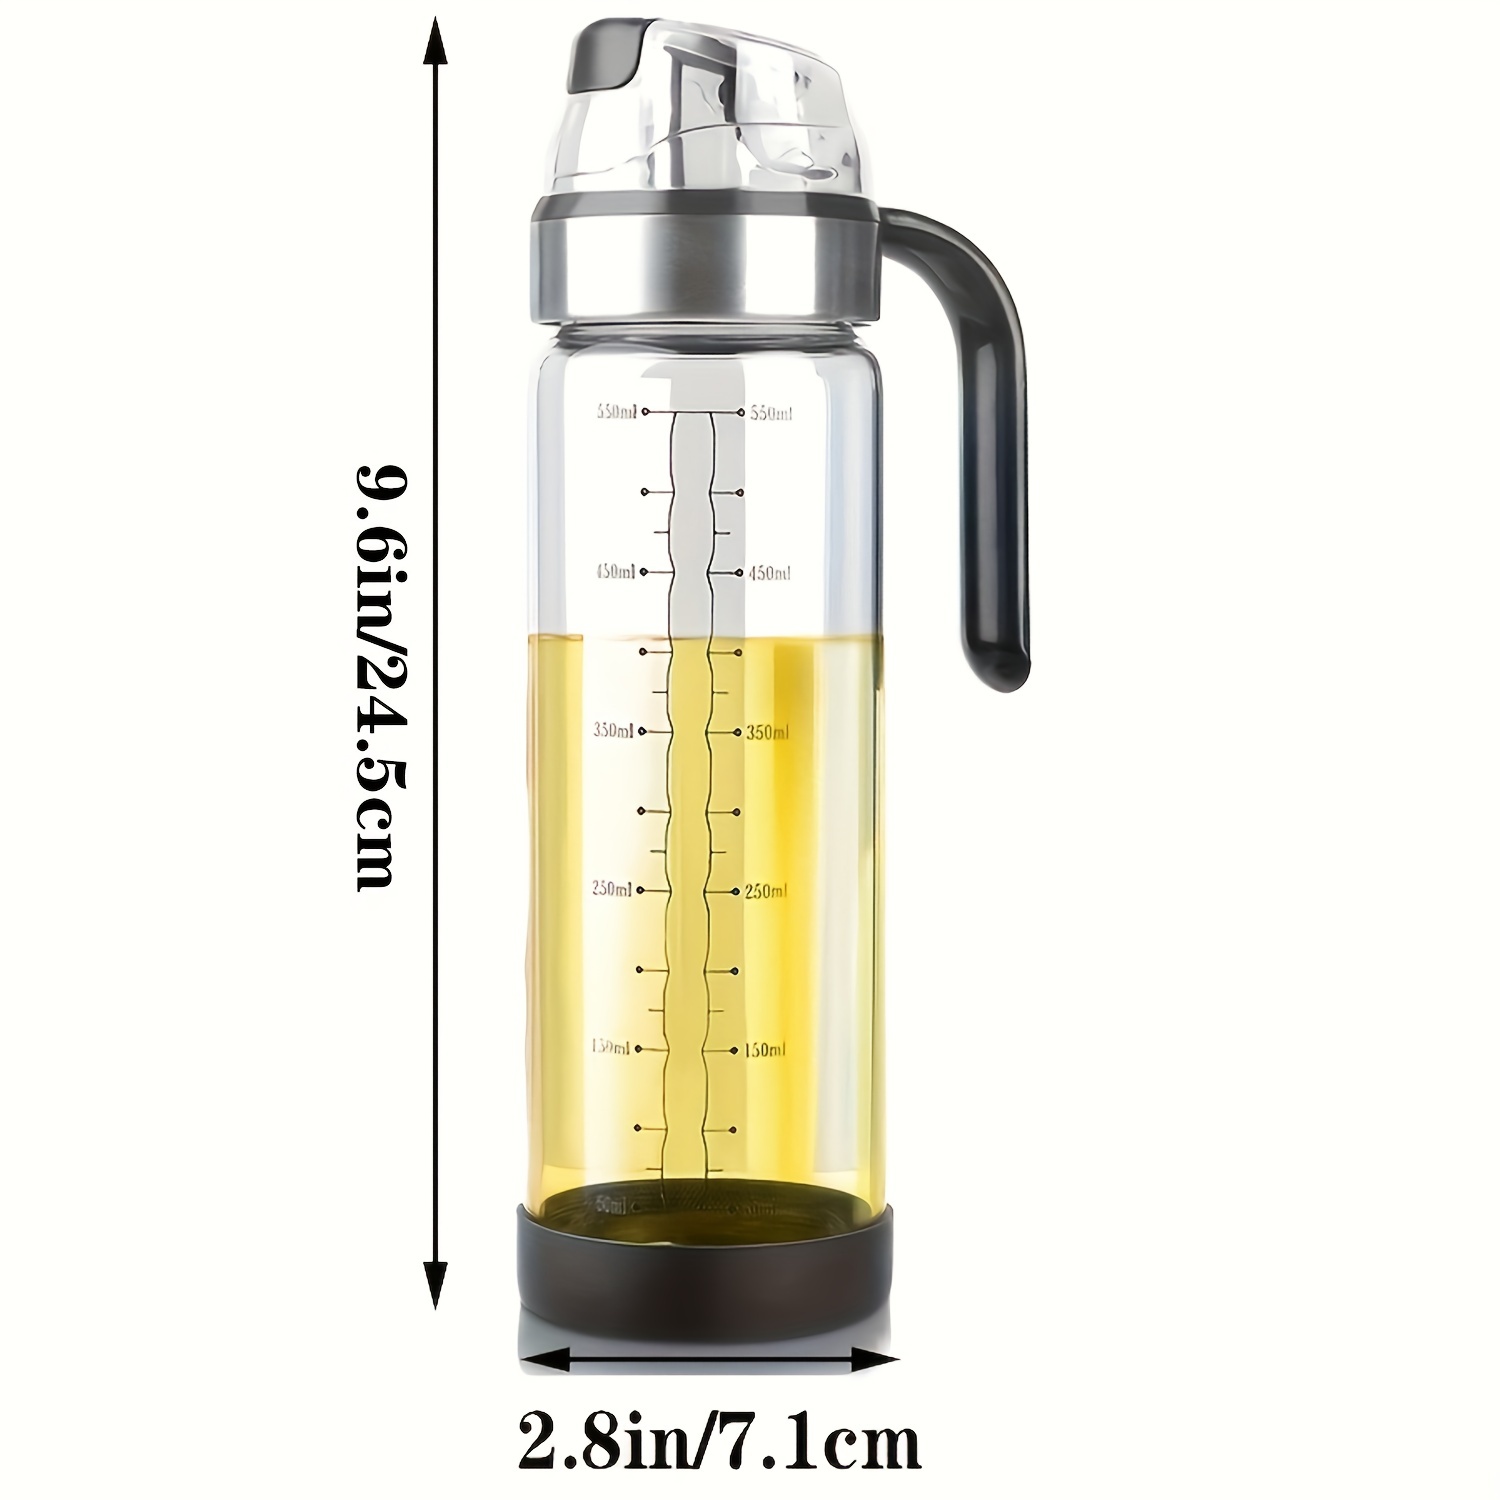 FARI Olive Oil Dispenser Bottles, Automatic Opening and Closing